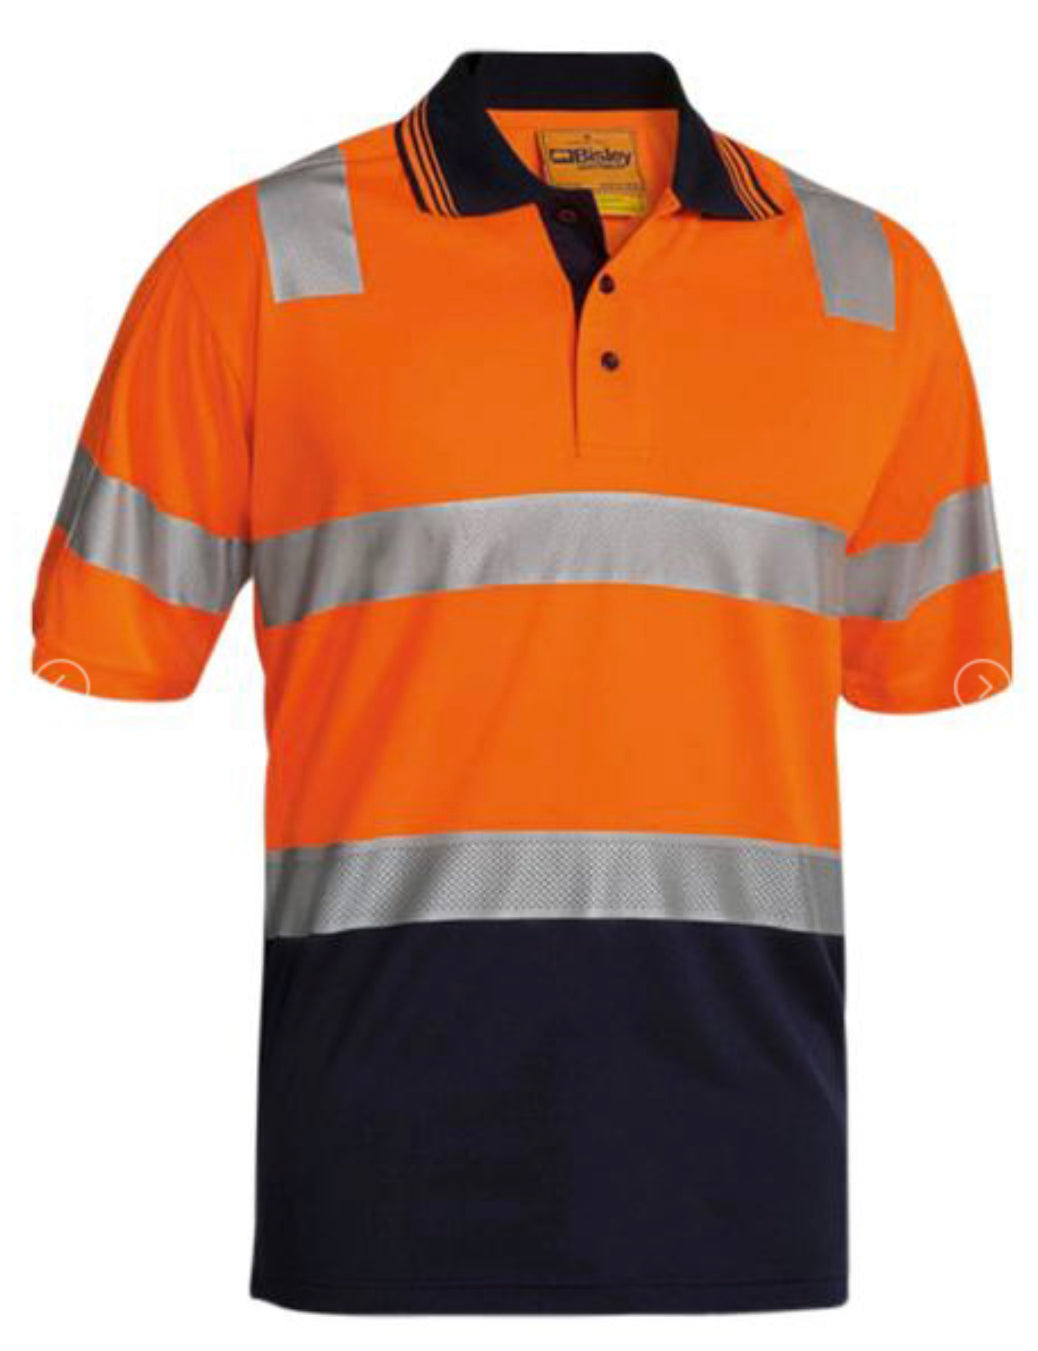 Bisley 3M Tapped 2T Hi Vis Polyester Polo Short Sleeve Shirt